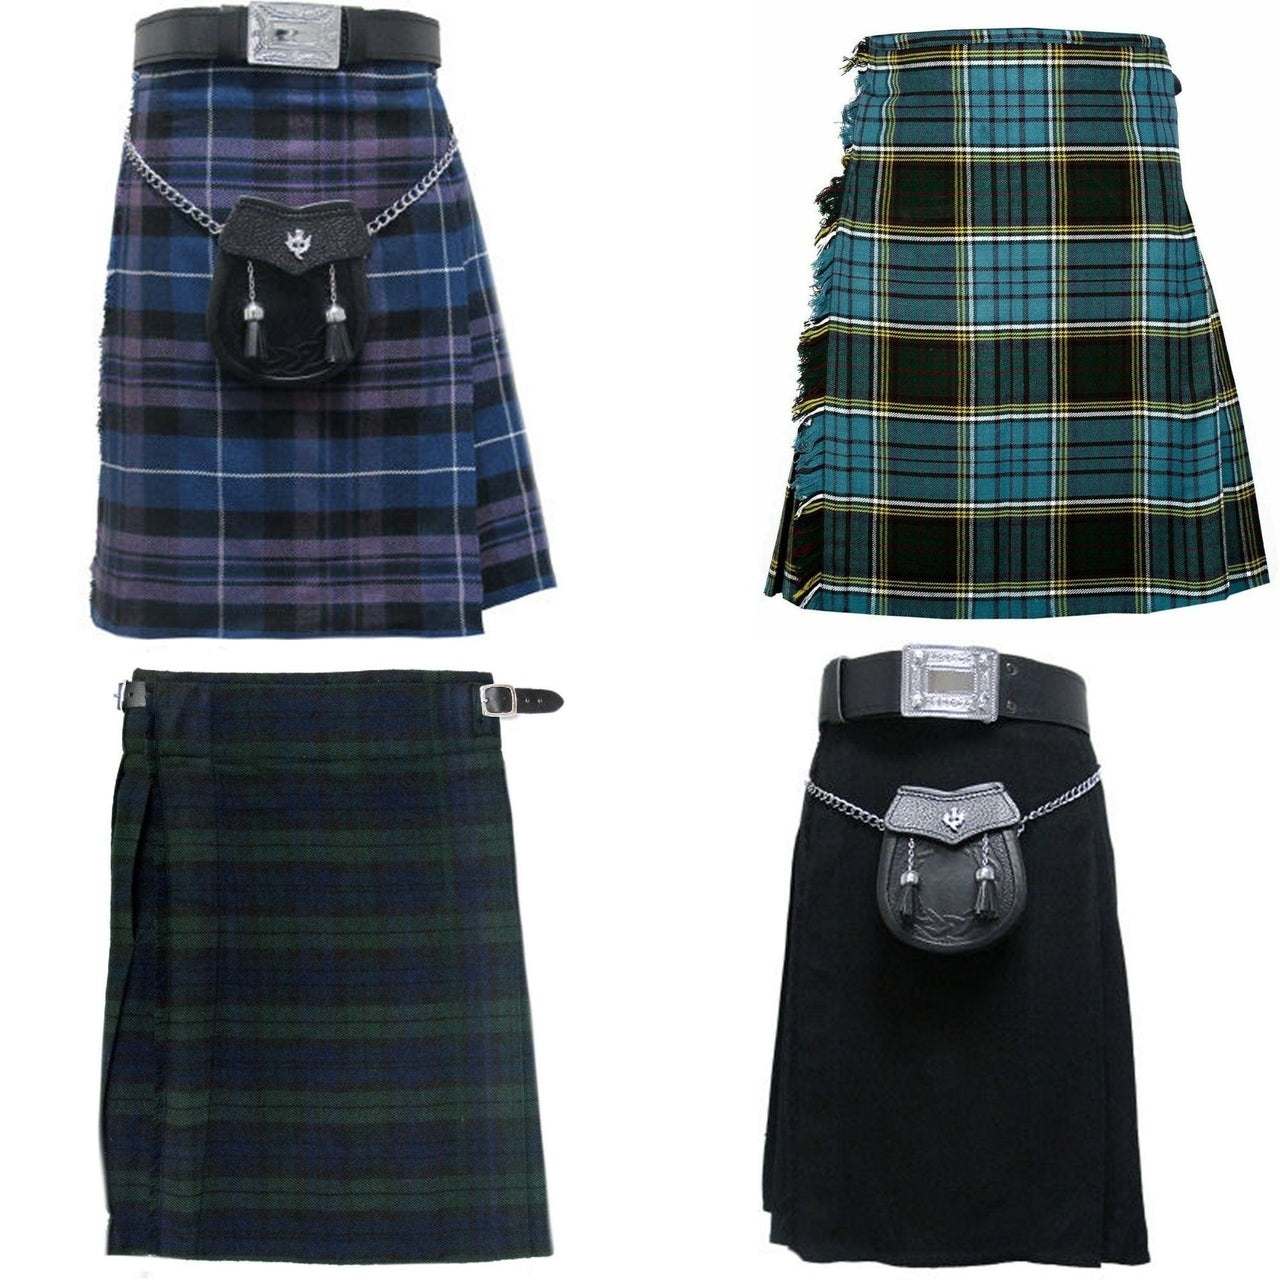 Baby & Kids Kilt Outfit  With Sporran Ages 0-1 to 13-14